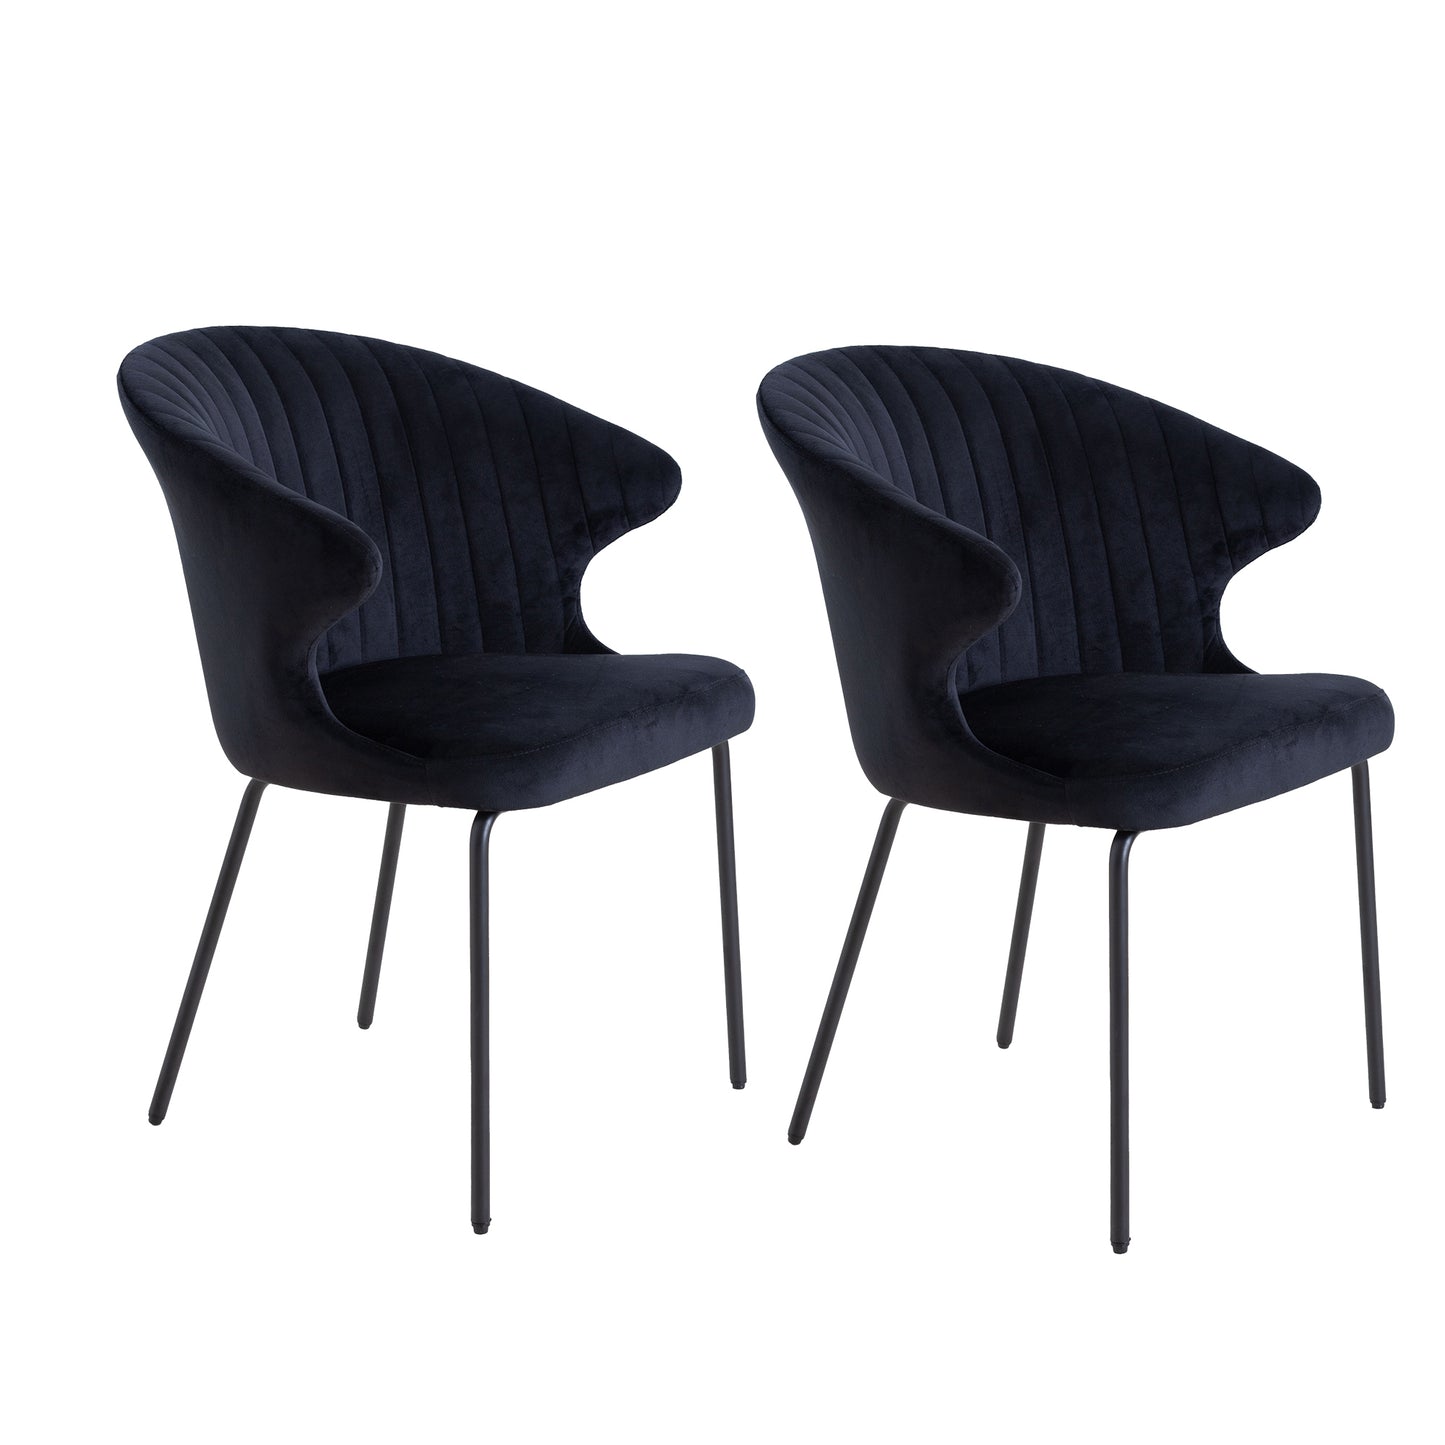 Justone Modern Linen Dining Side Chairs Set of 2 Black